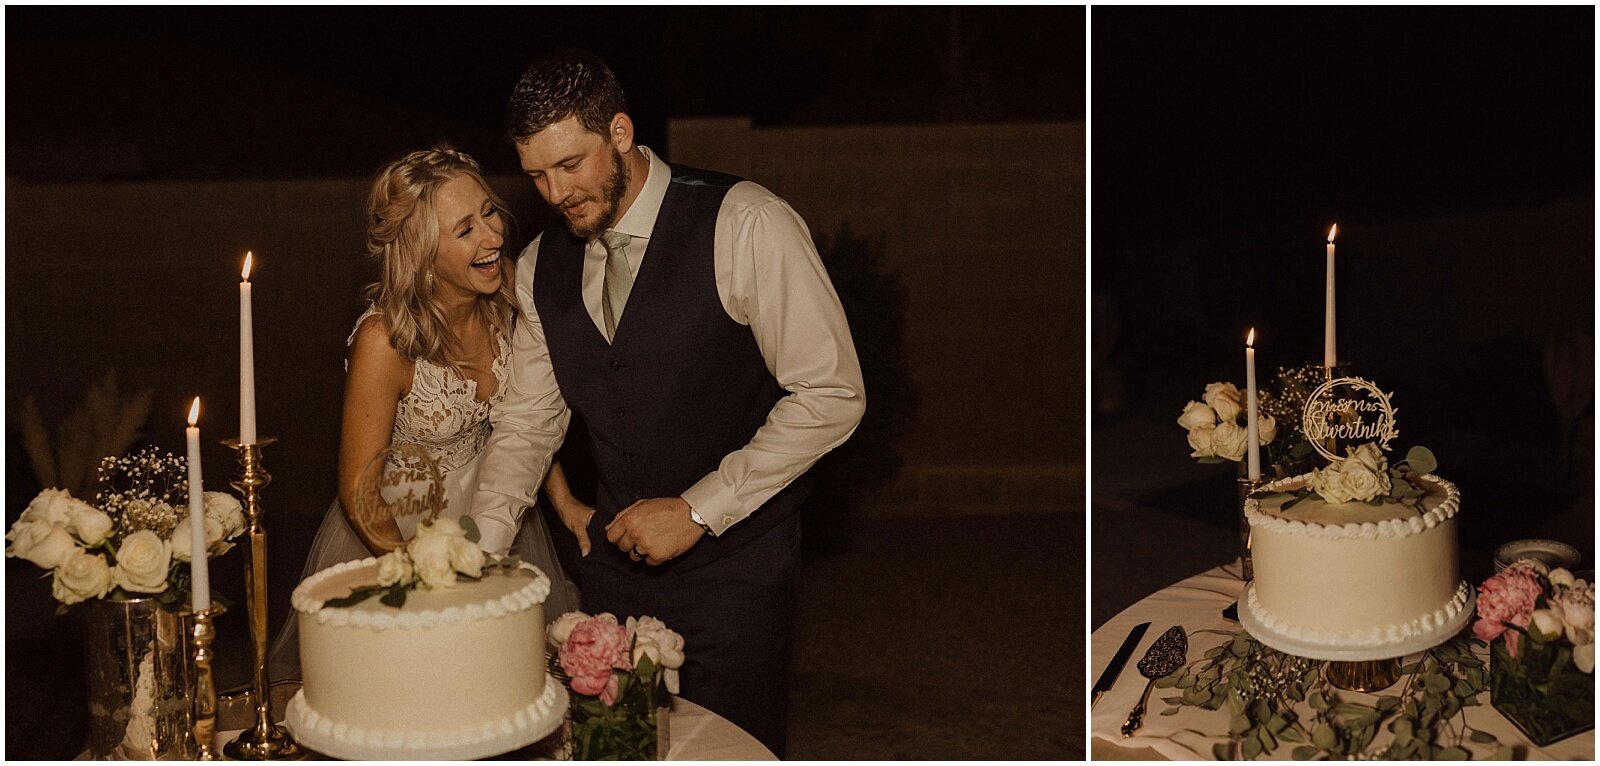 bride and groom cutting their wedding cake during intimate backyard elopement